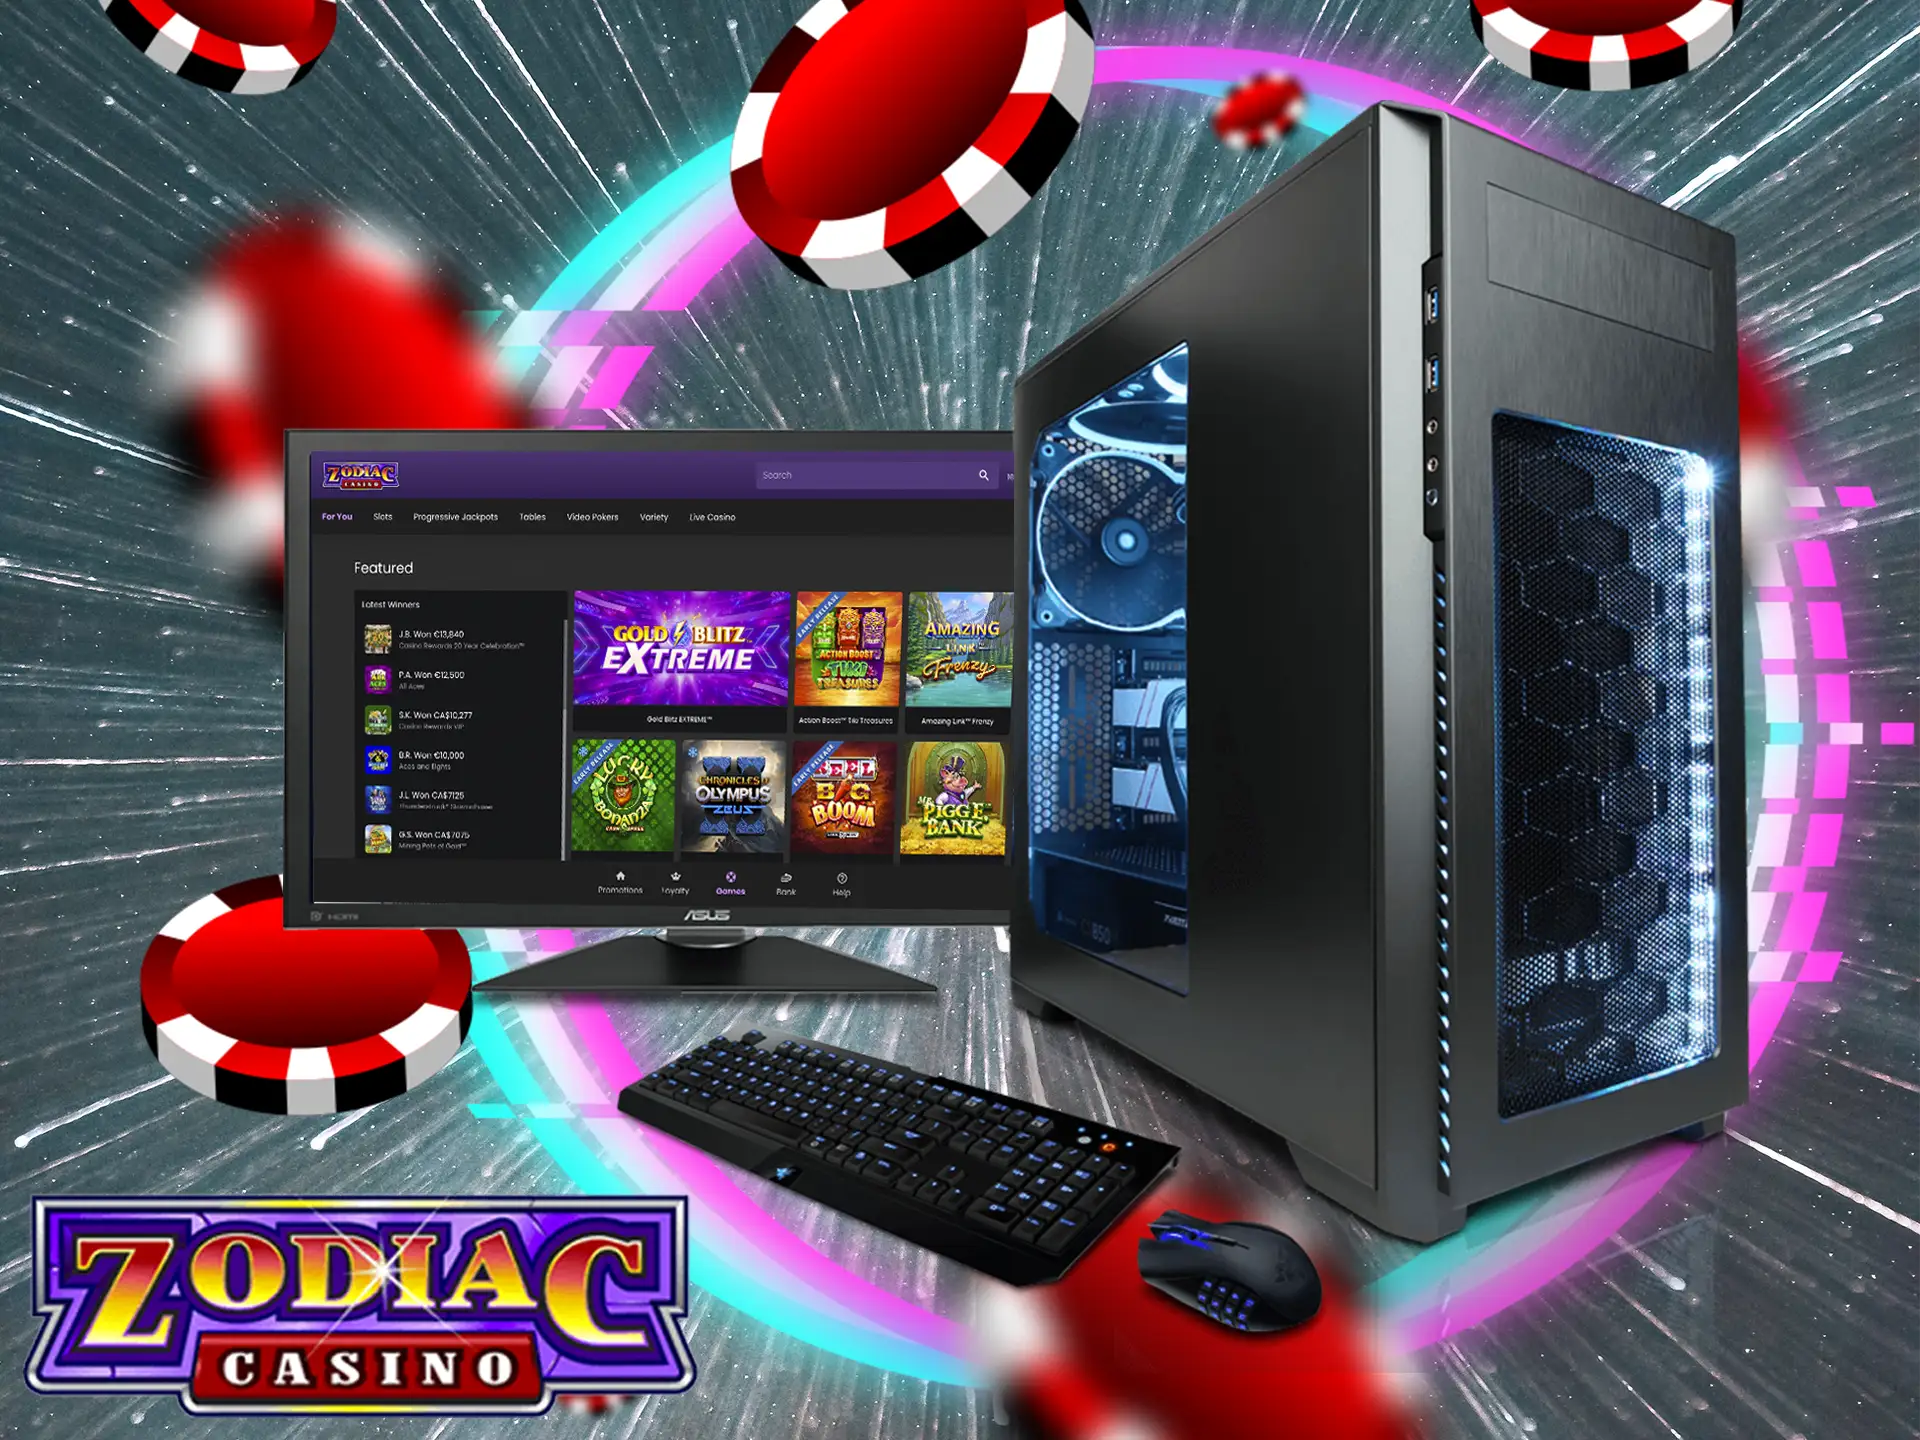 You can have a good time with the big screen of your computer, because this version of Zodiac Casino is universal and adapts to all resolutions.